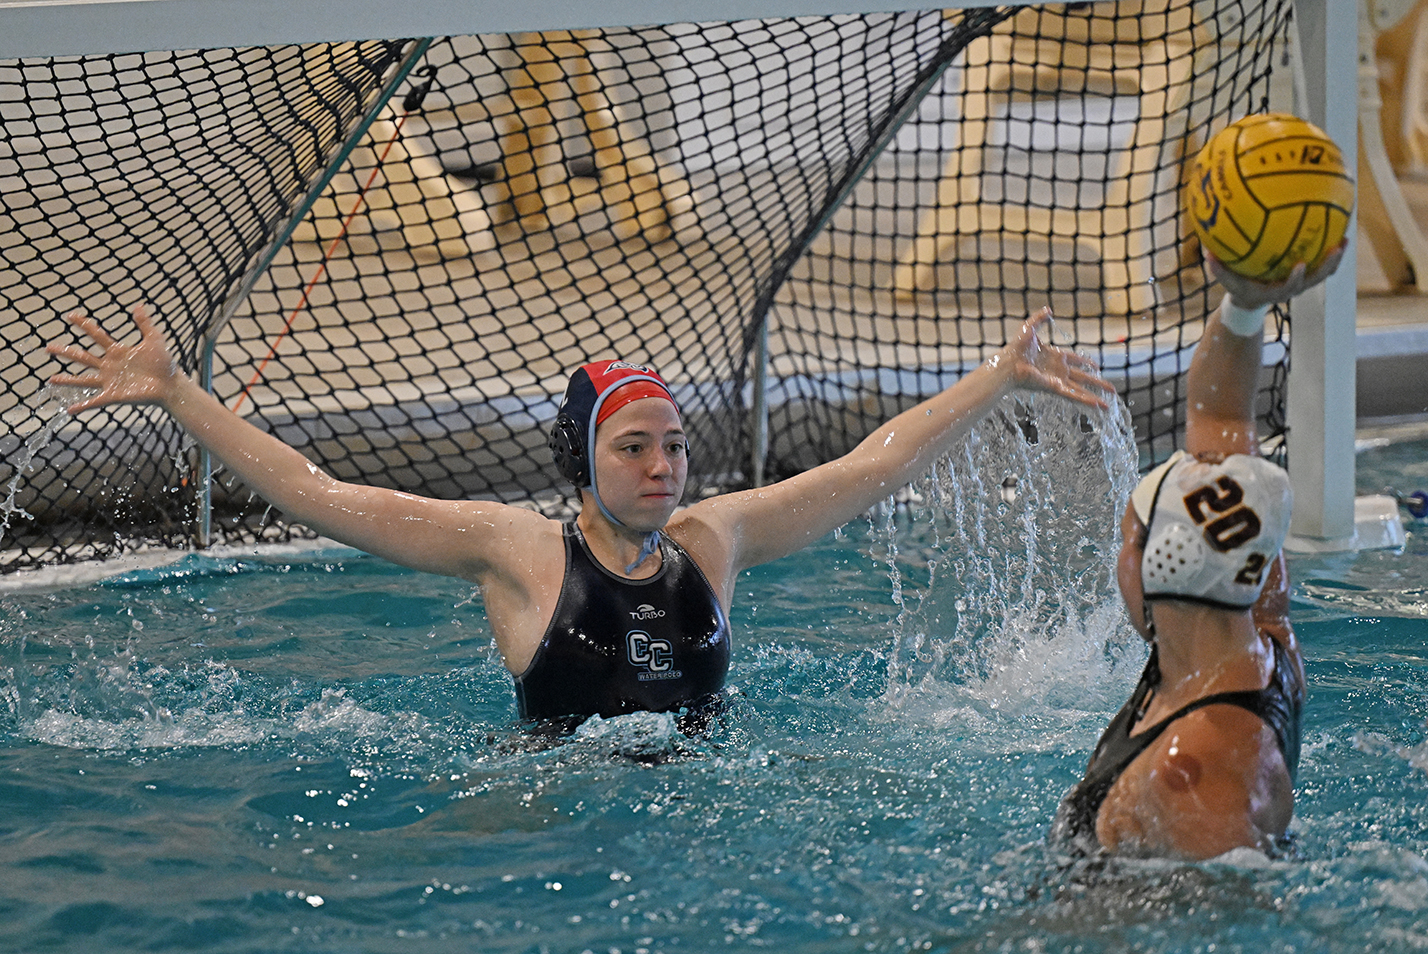 water polo goalie rises out of the water to defend the goal